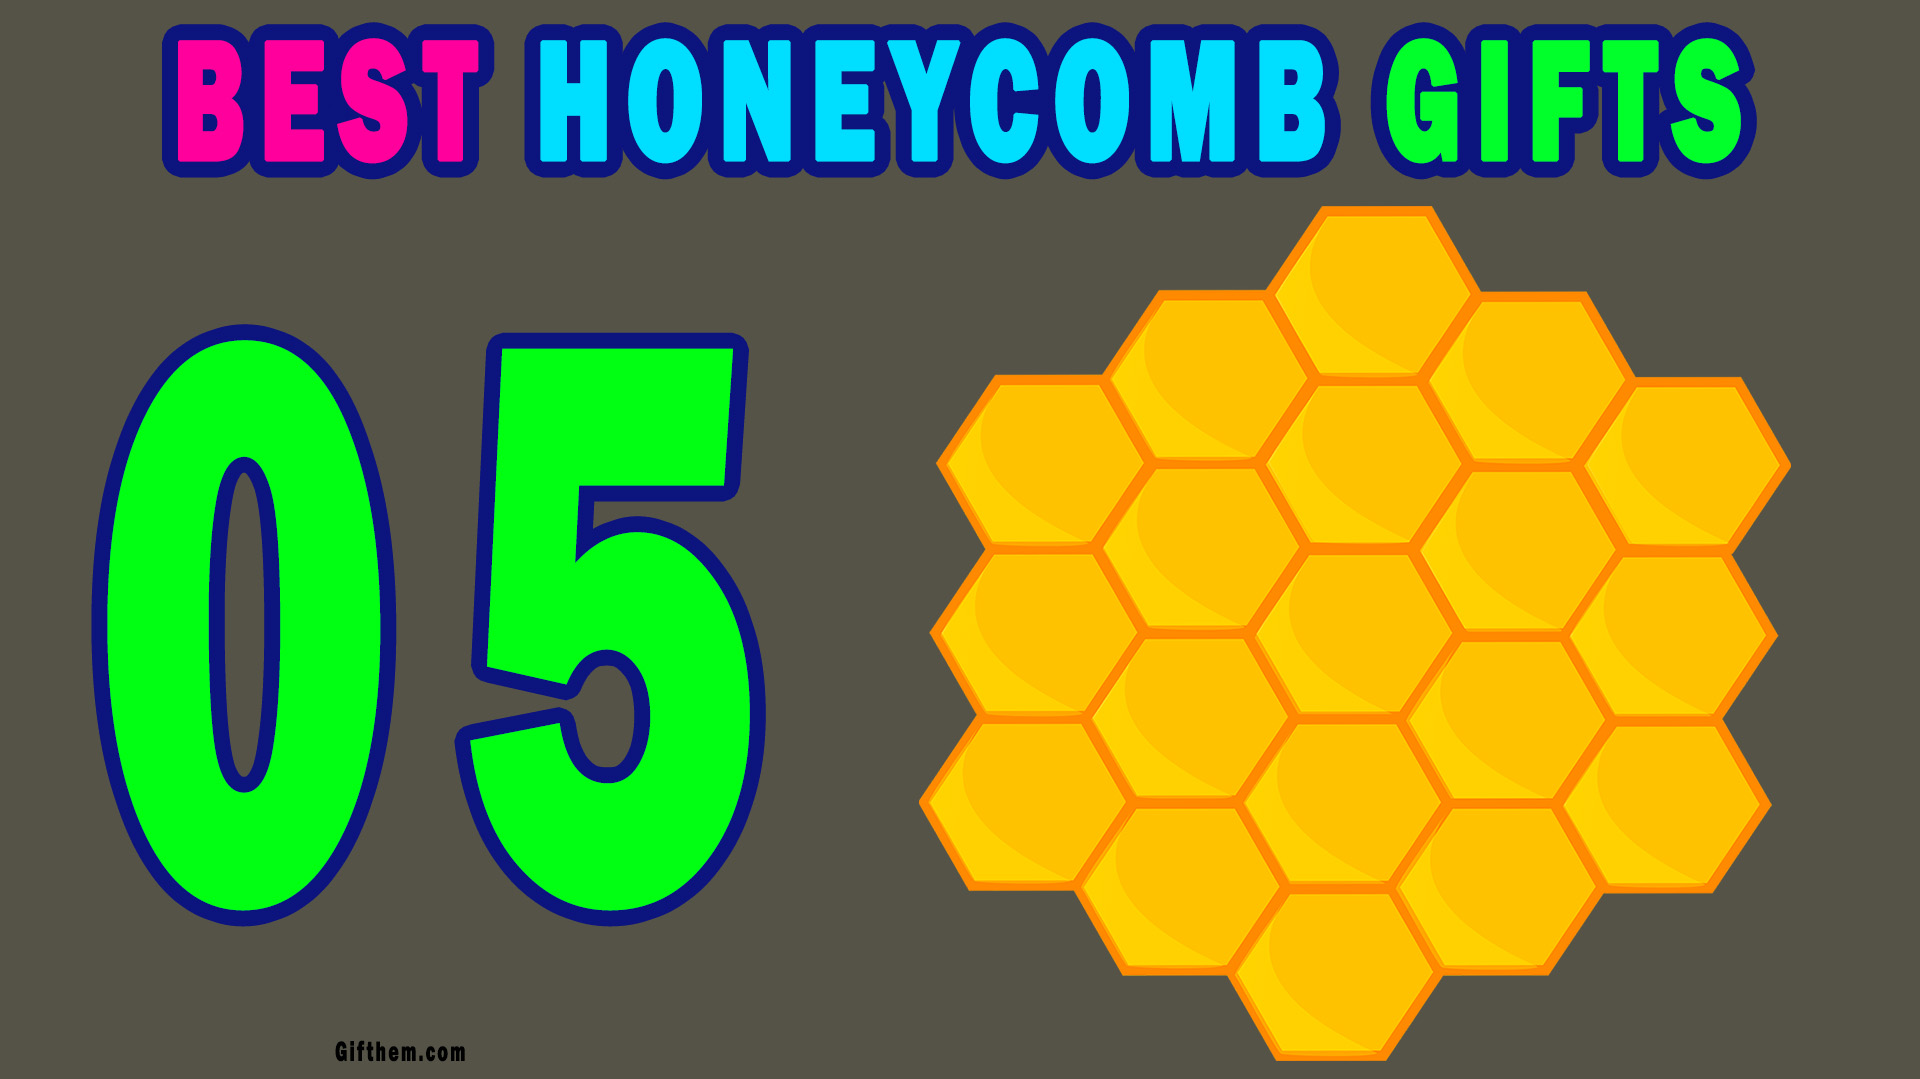 Honeycomb Gifts